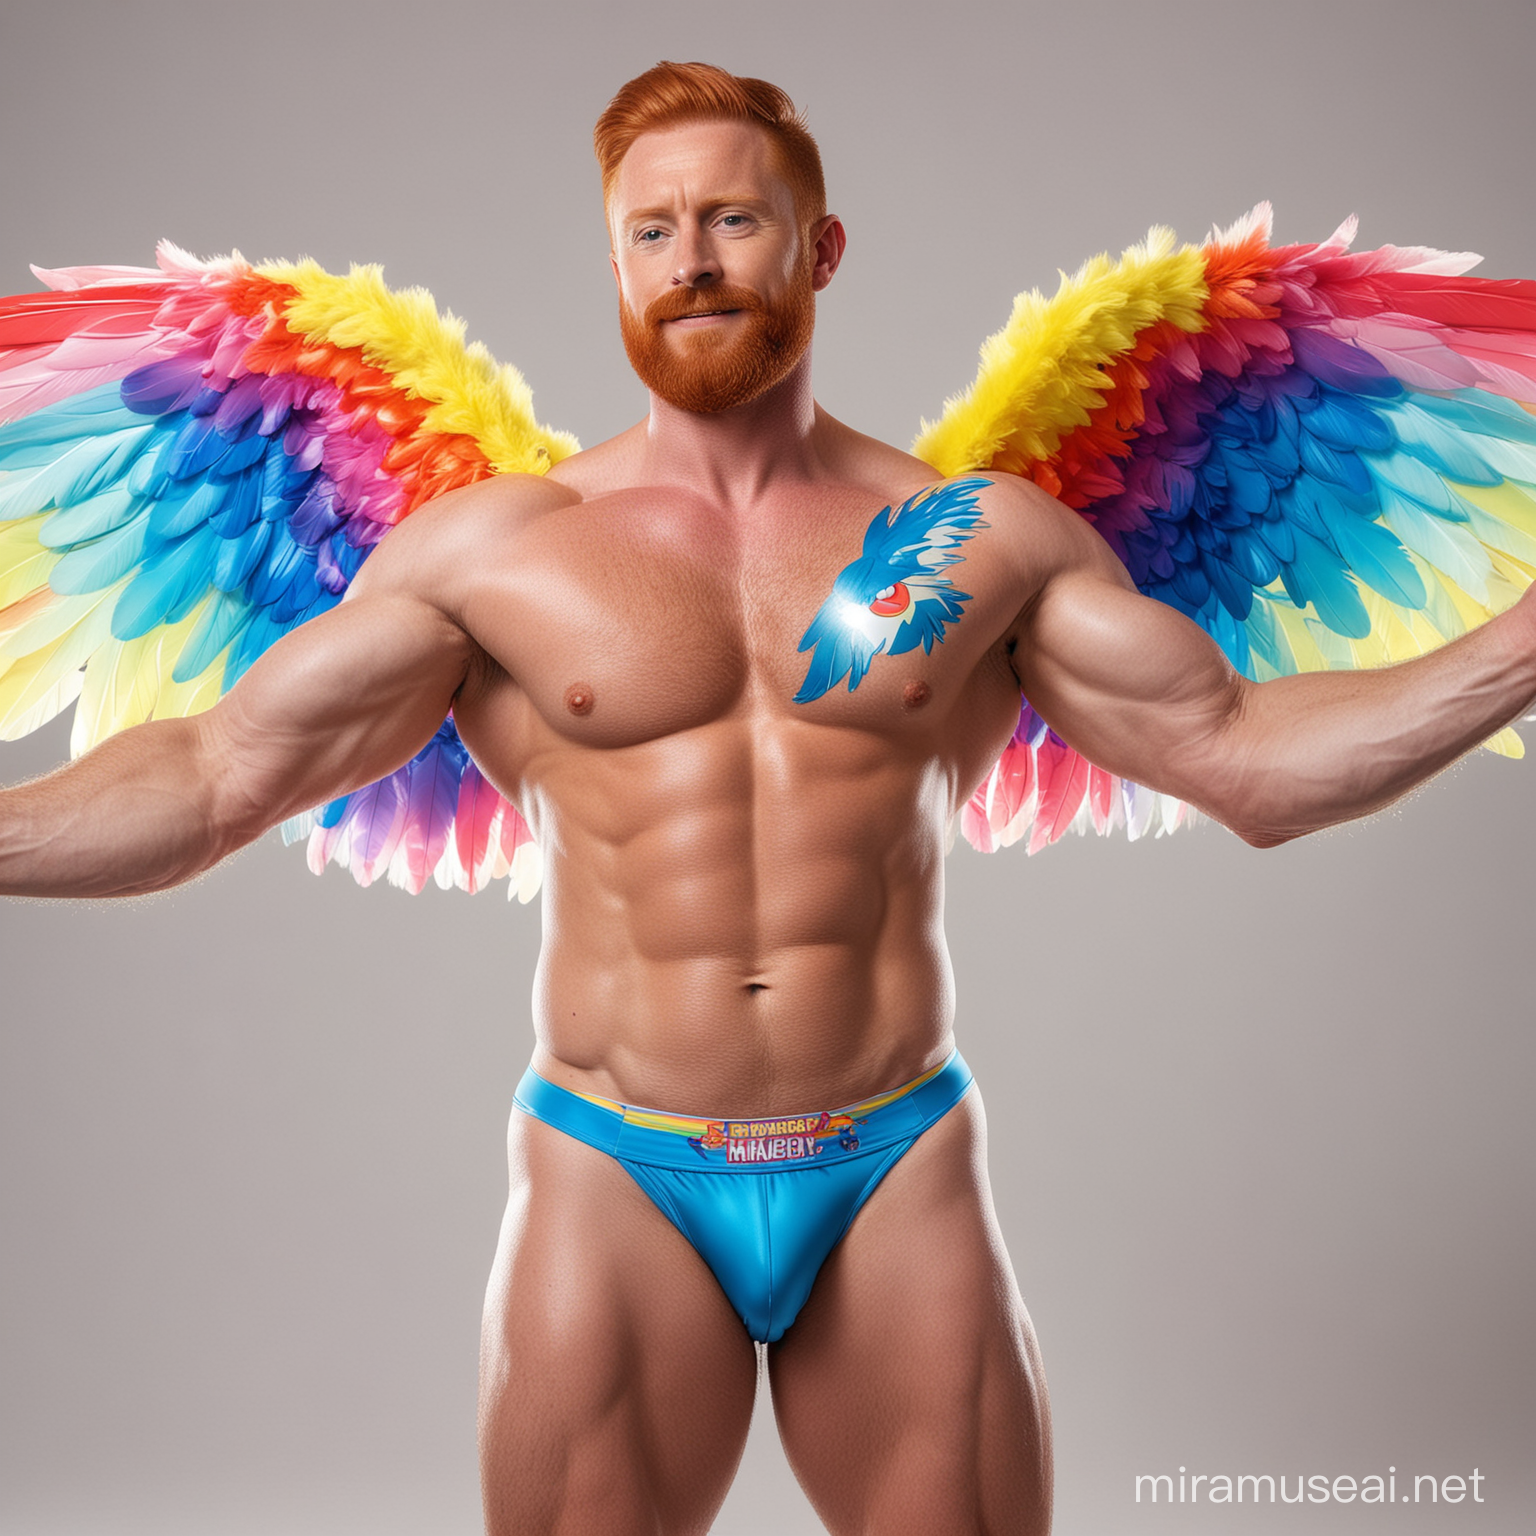 Muscular Redhead Bodybuilder Flexing in Vibrant Rainbow Jacket with Eagle Wings and Doraemon